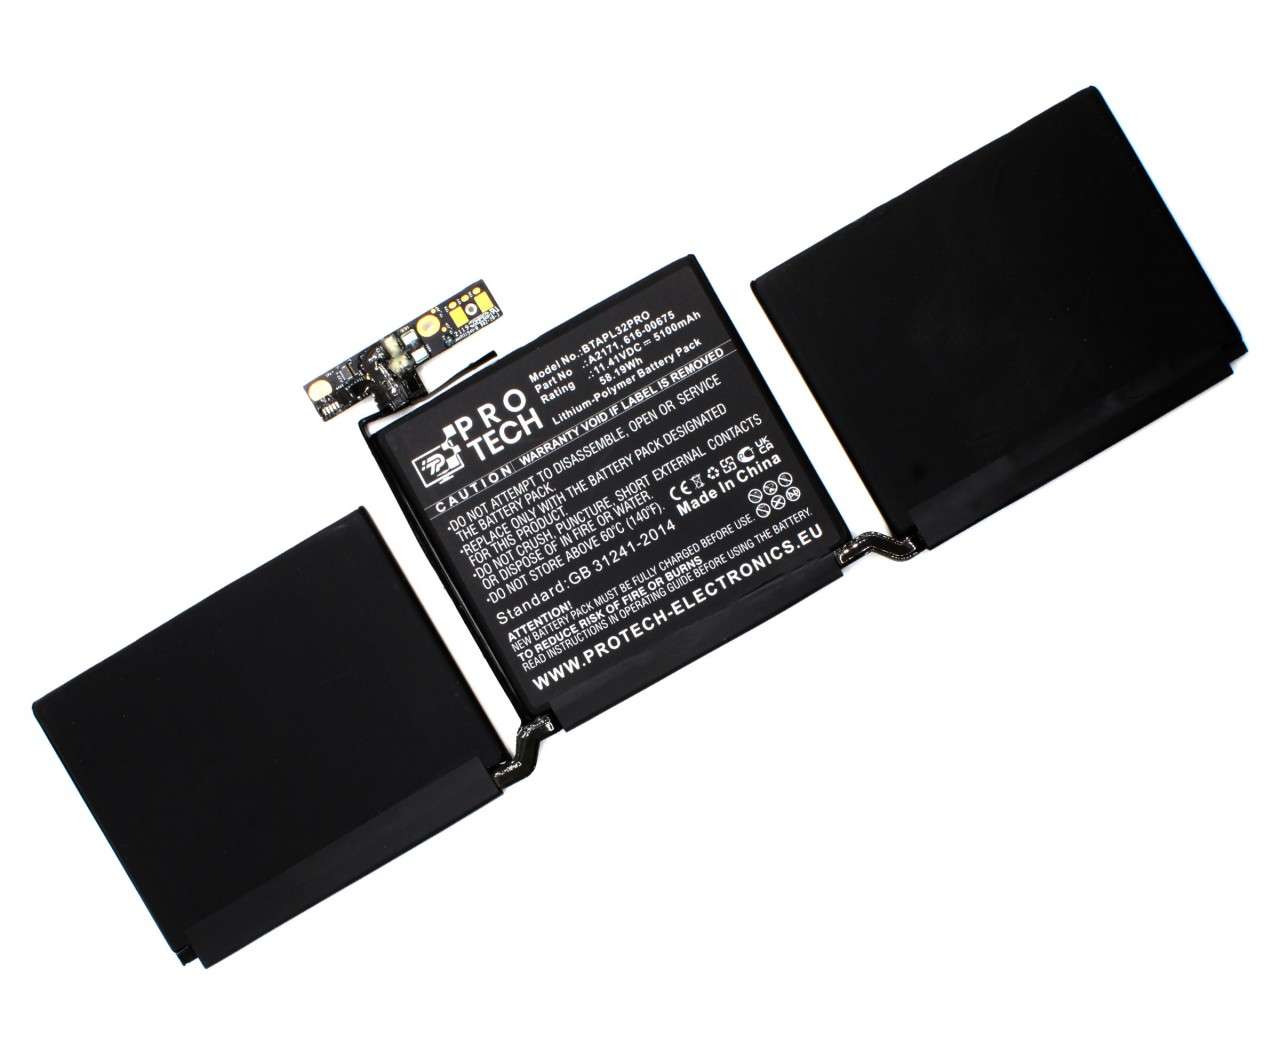 Baterie Apple Macbook Pro 13 Touch Bar A2159 2019 Protech High Quality Replacement 2019 imagine noua reconect.ro